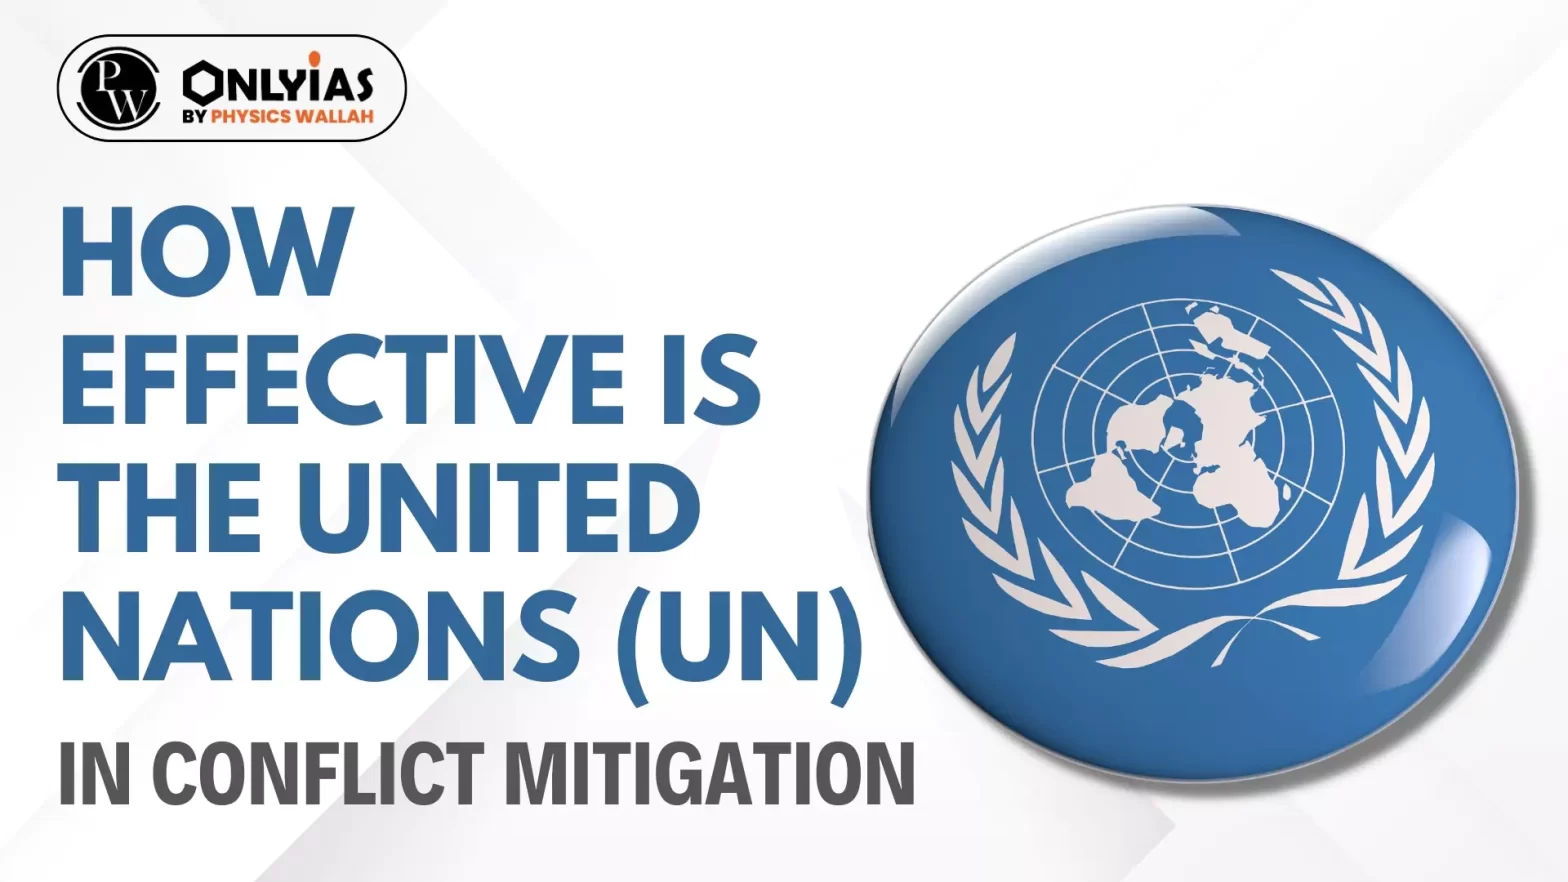 How Effective is the United Nations (UN) in Conflict Mitigation